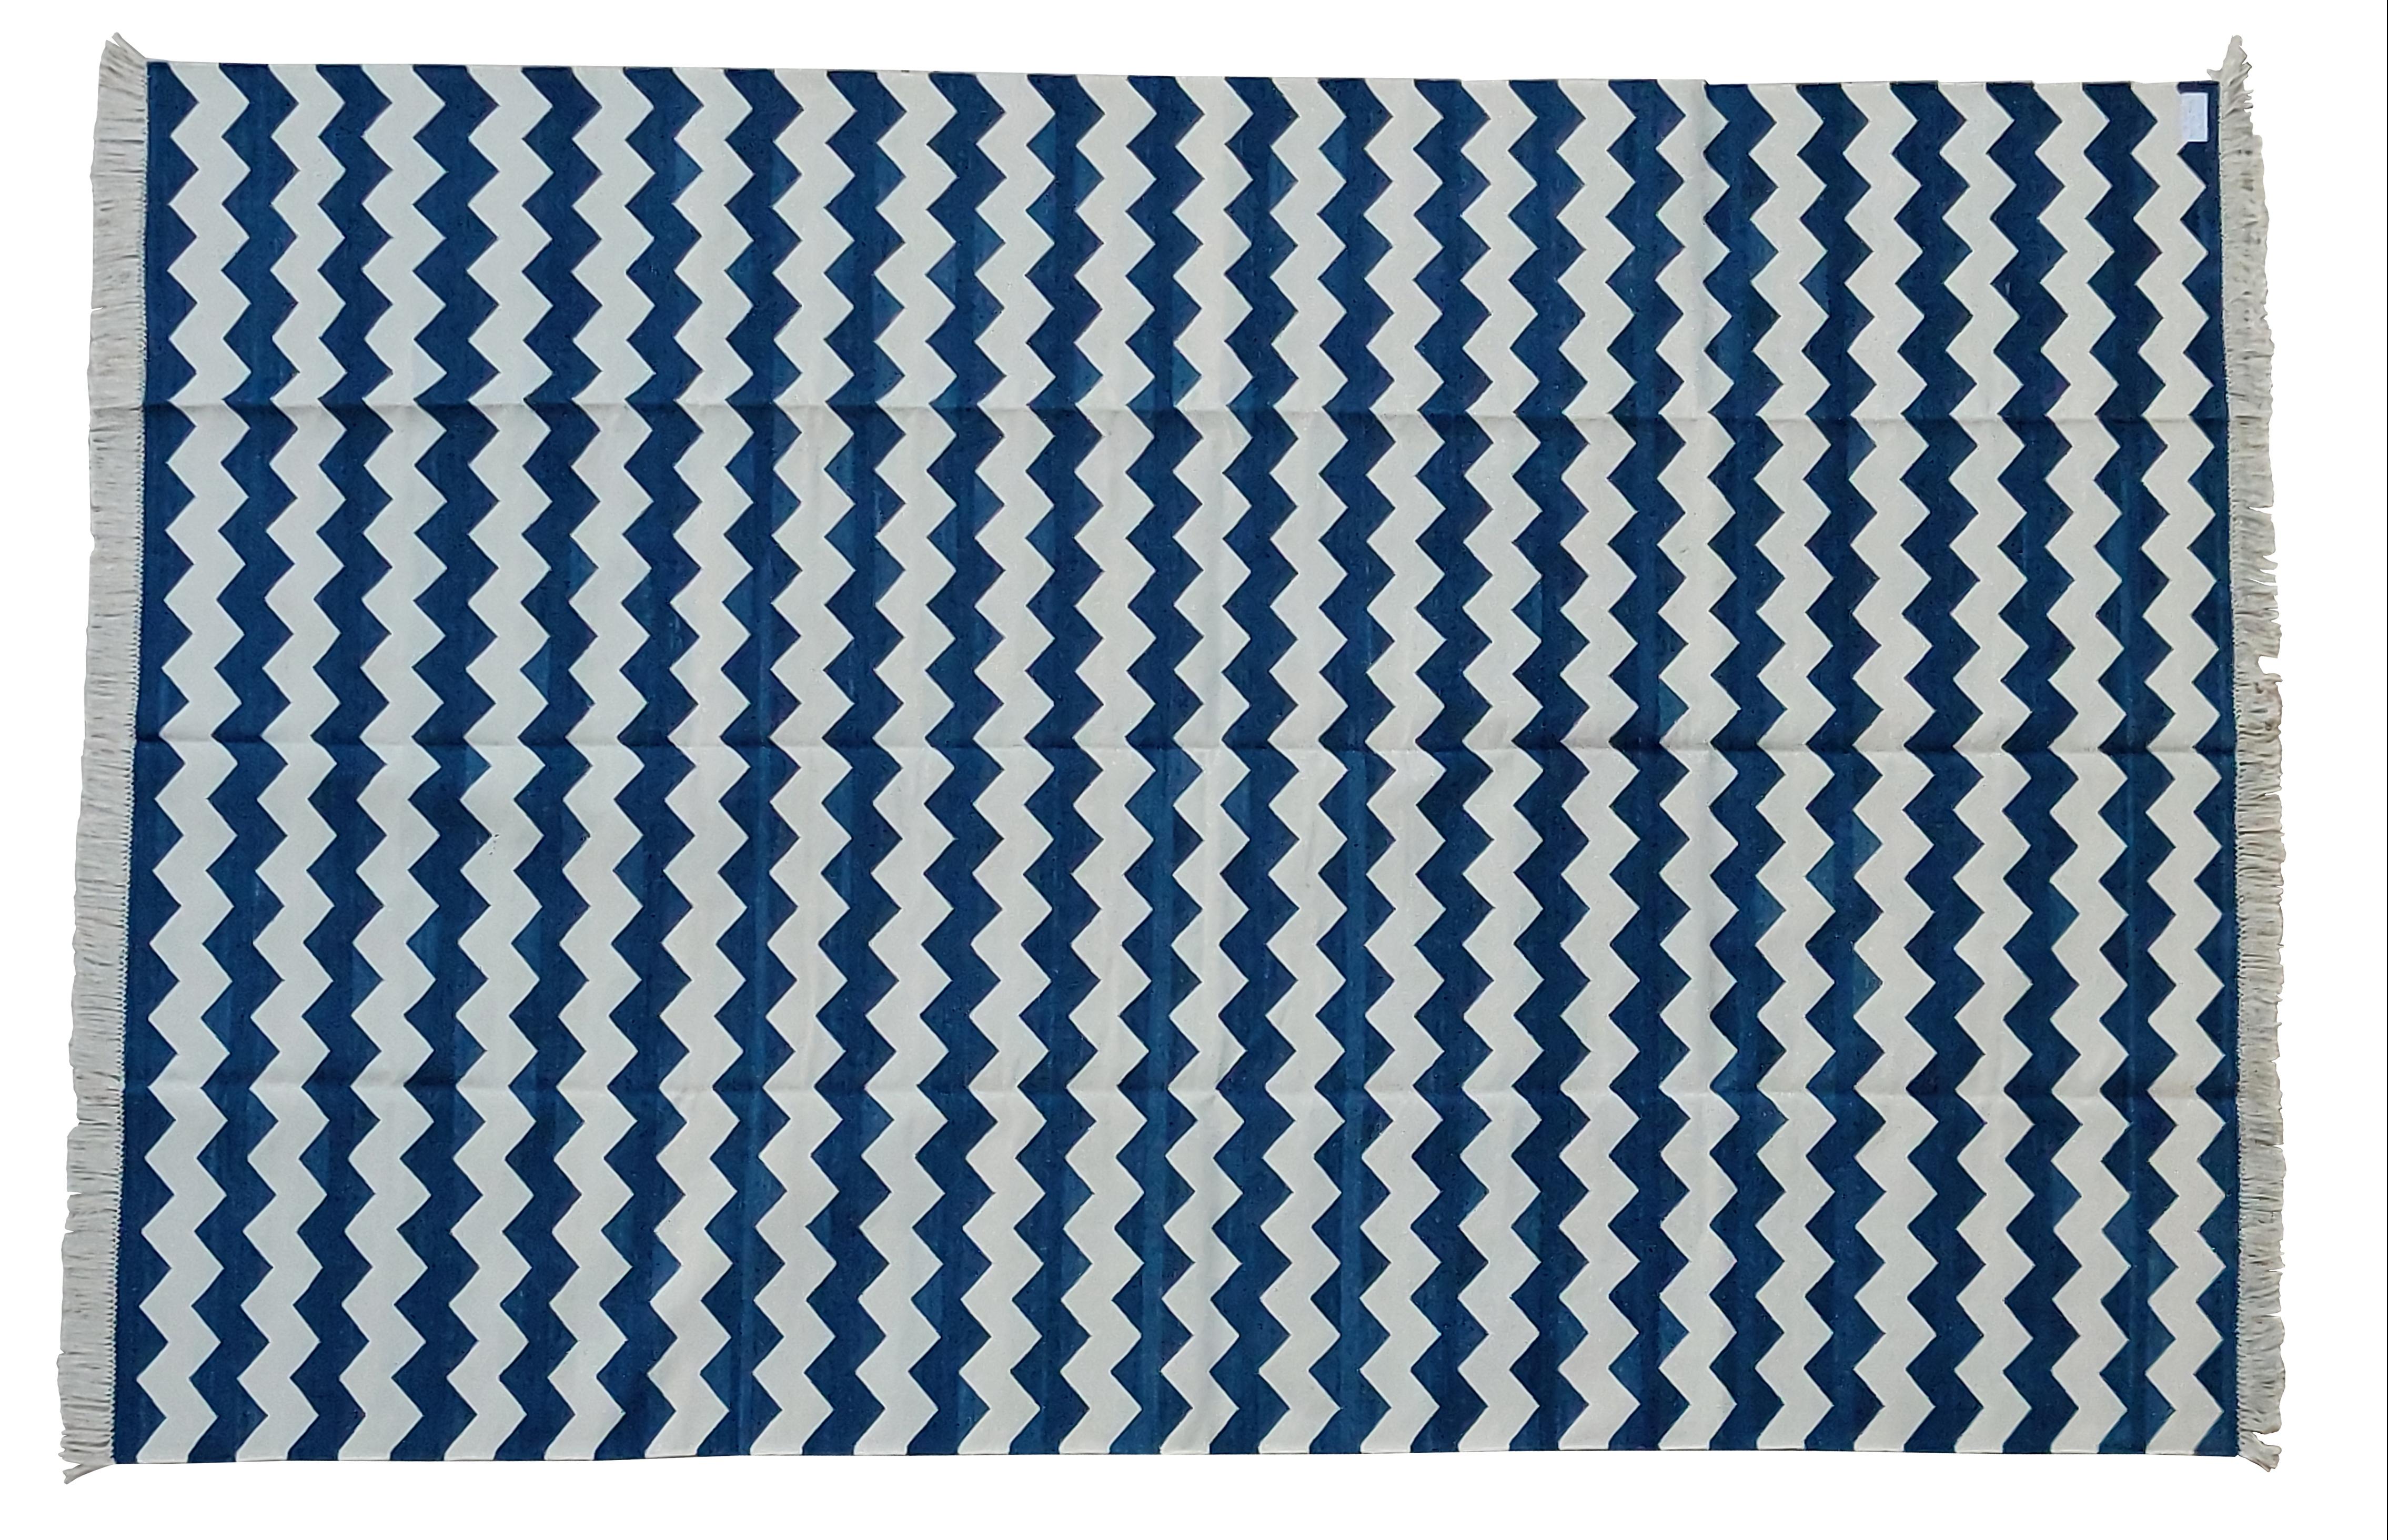 Cotton Natural Vegetable Dyed, Blue And White Zig Zag Striped Indian Rug - 6'x9'
These special flat-weave dhurries are hand-woven with 15 ply 100% cotton yarn. Due to the special manufacturing techniques used to create our rugs, the size and color